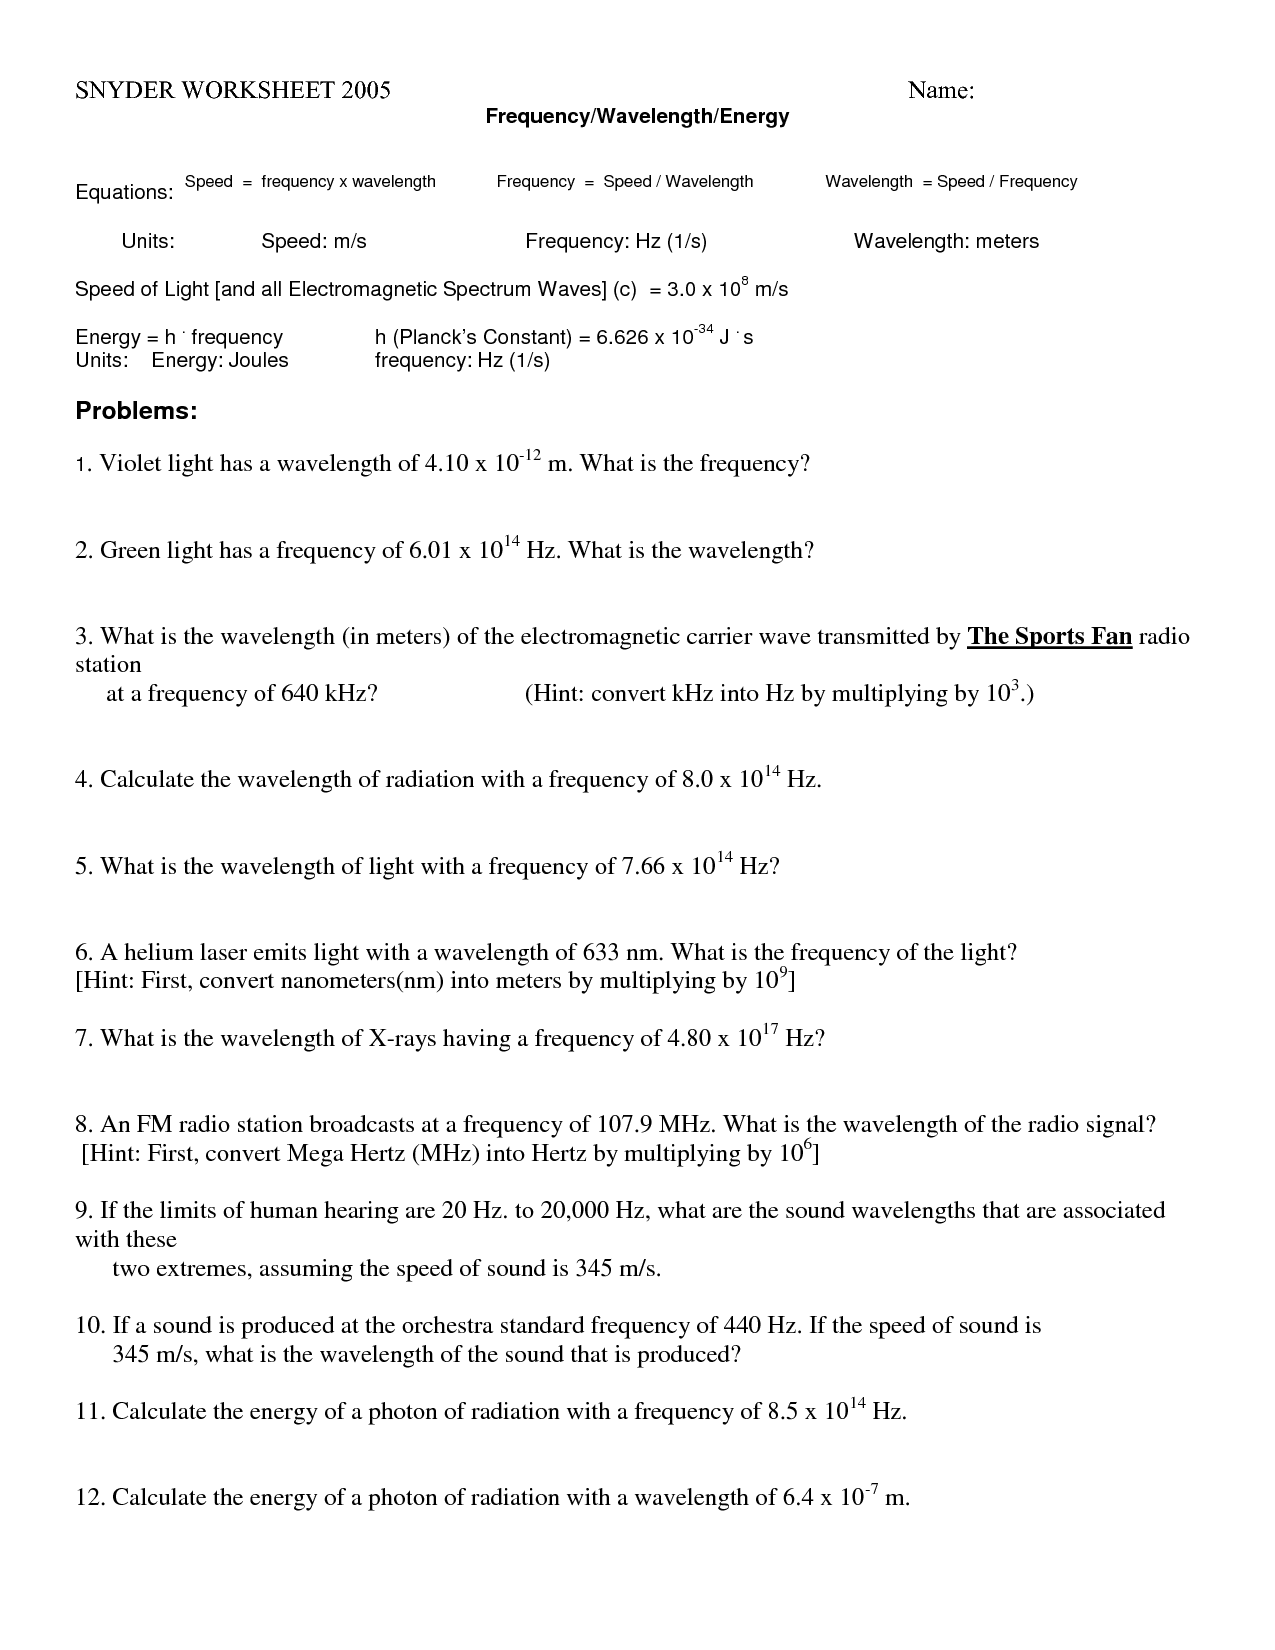 wave-calculations-worksheet-answers-blogly